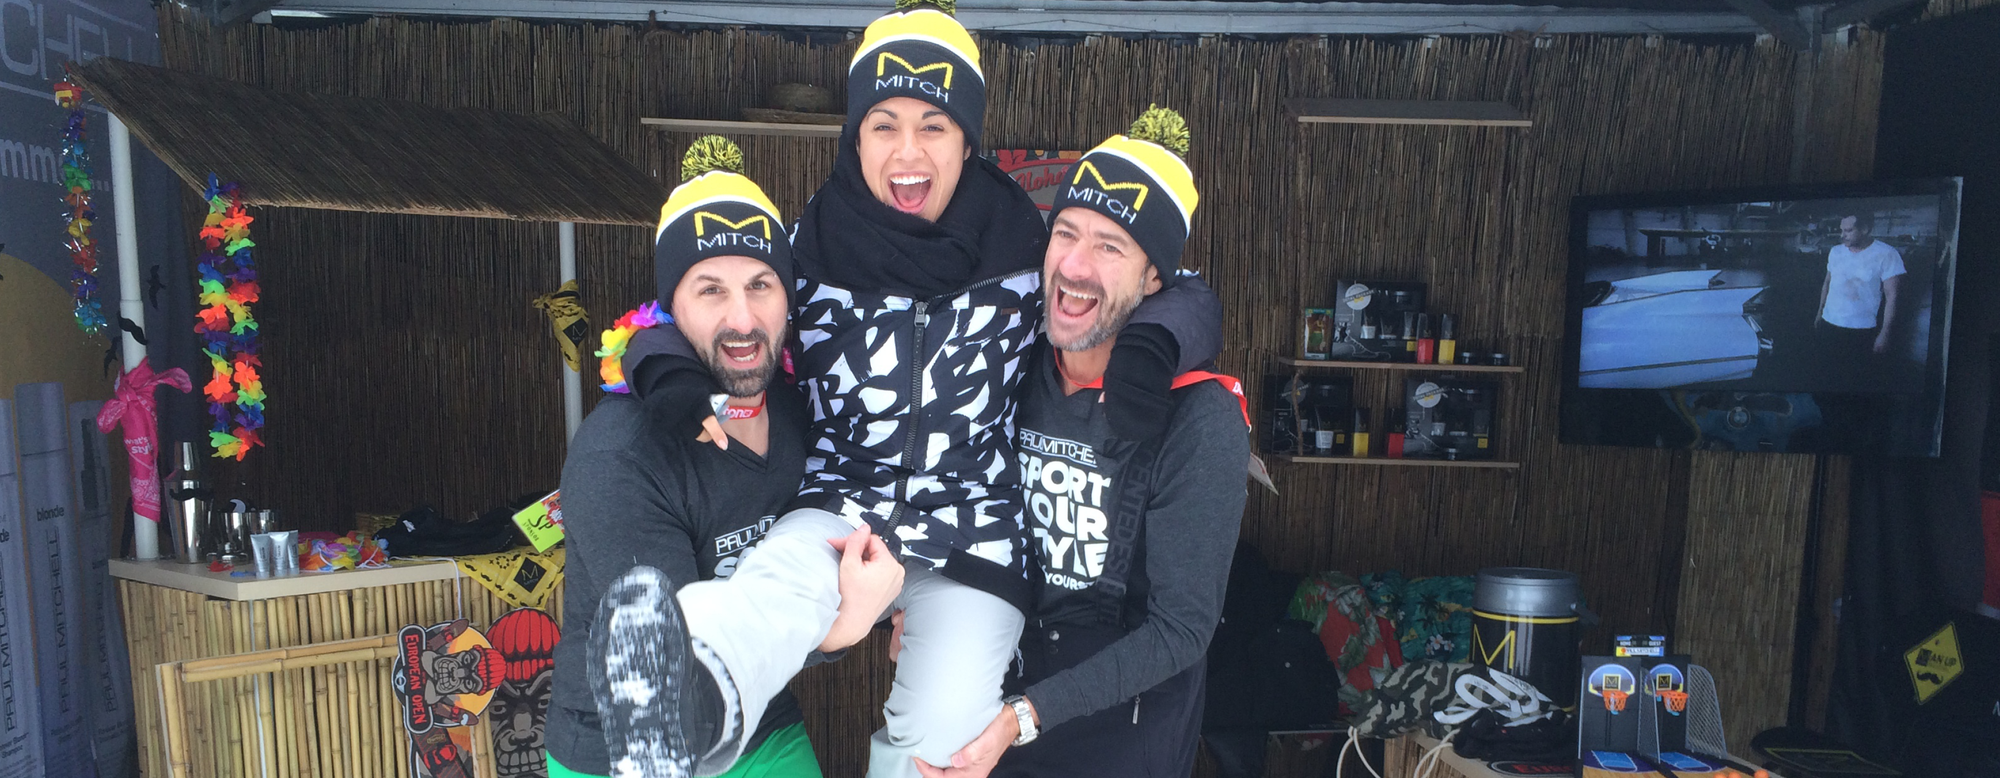 PM Care Sytsems AG Team at Burton Open Laax